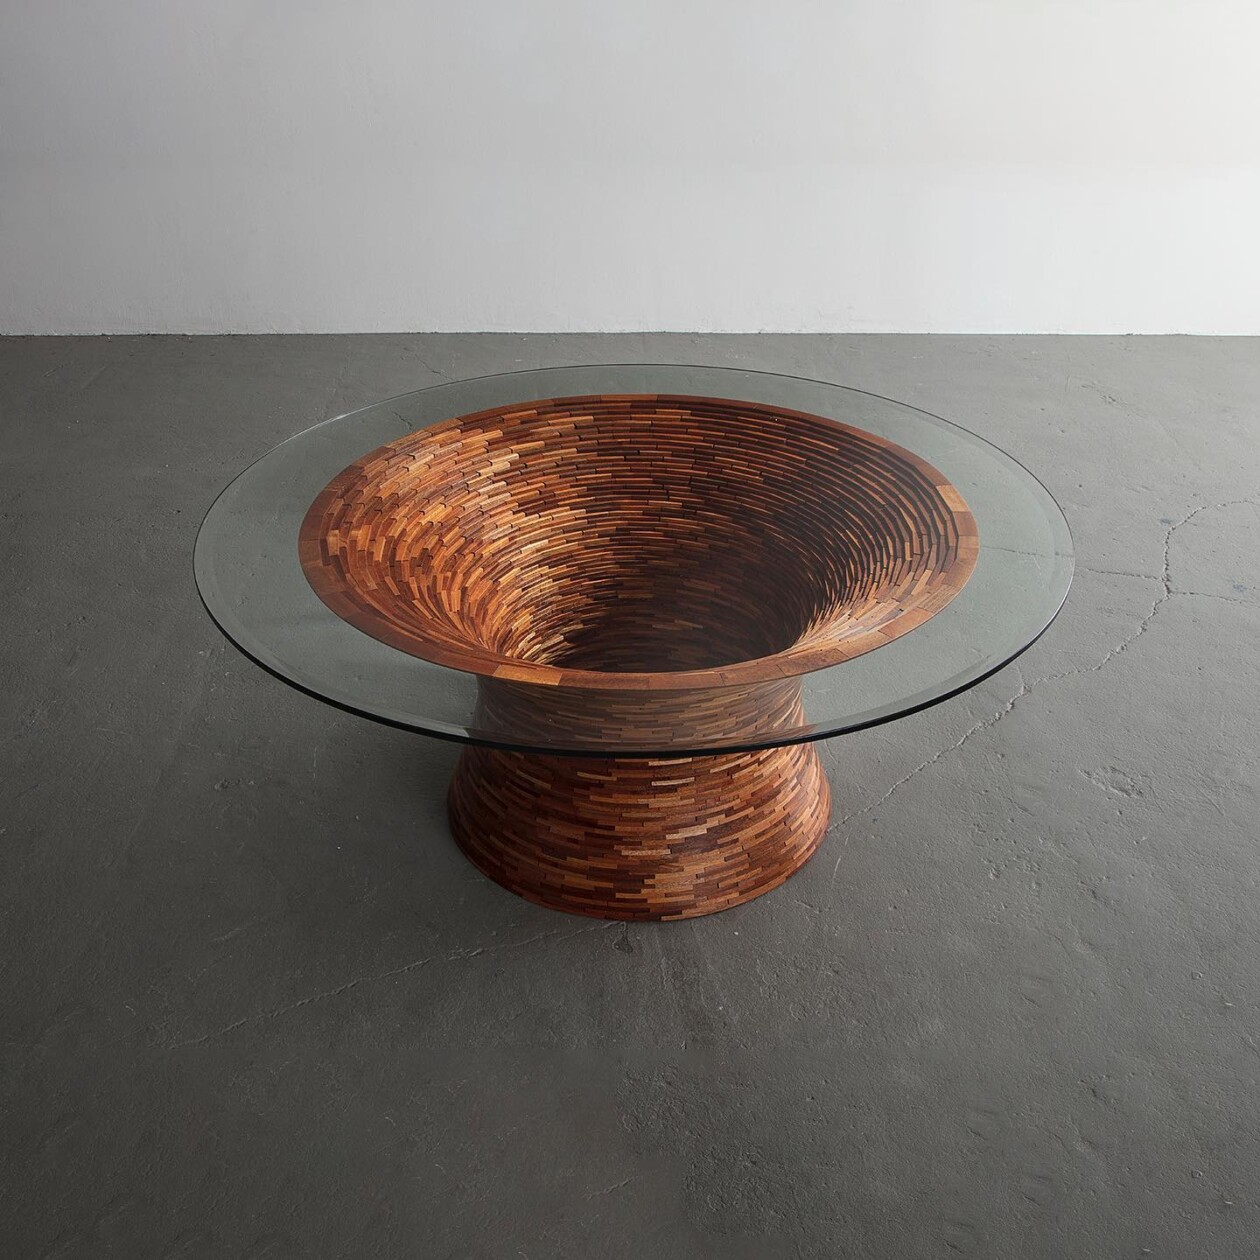 Elegant Sculptural Objects And Furniture By Richard Haining (4)